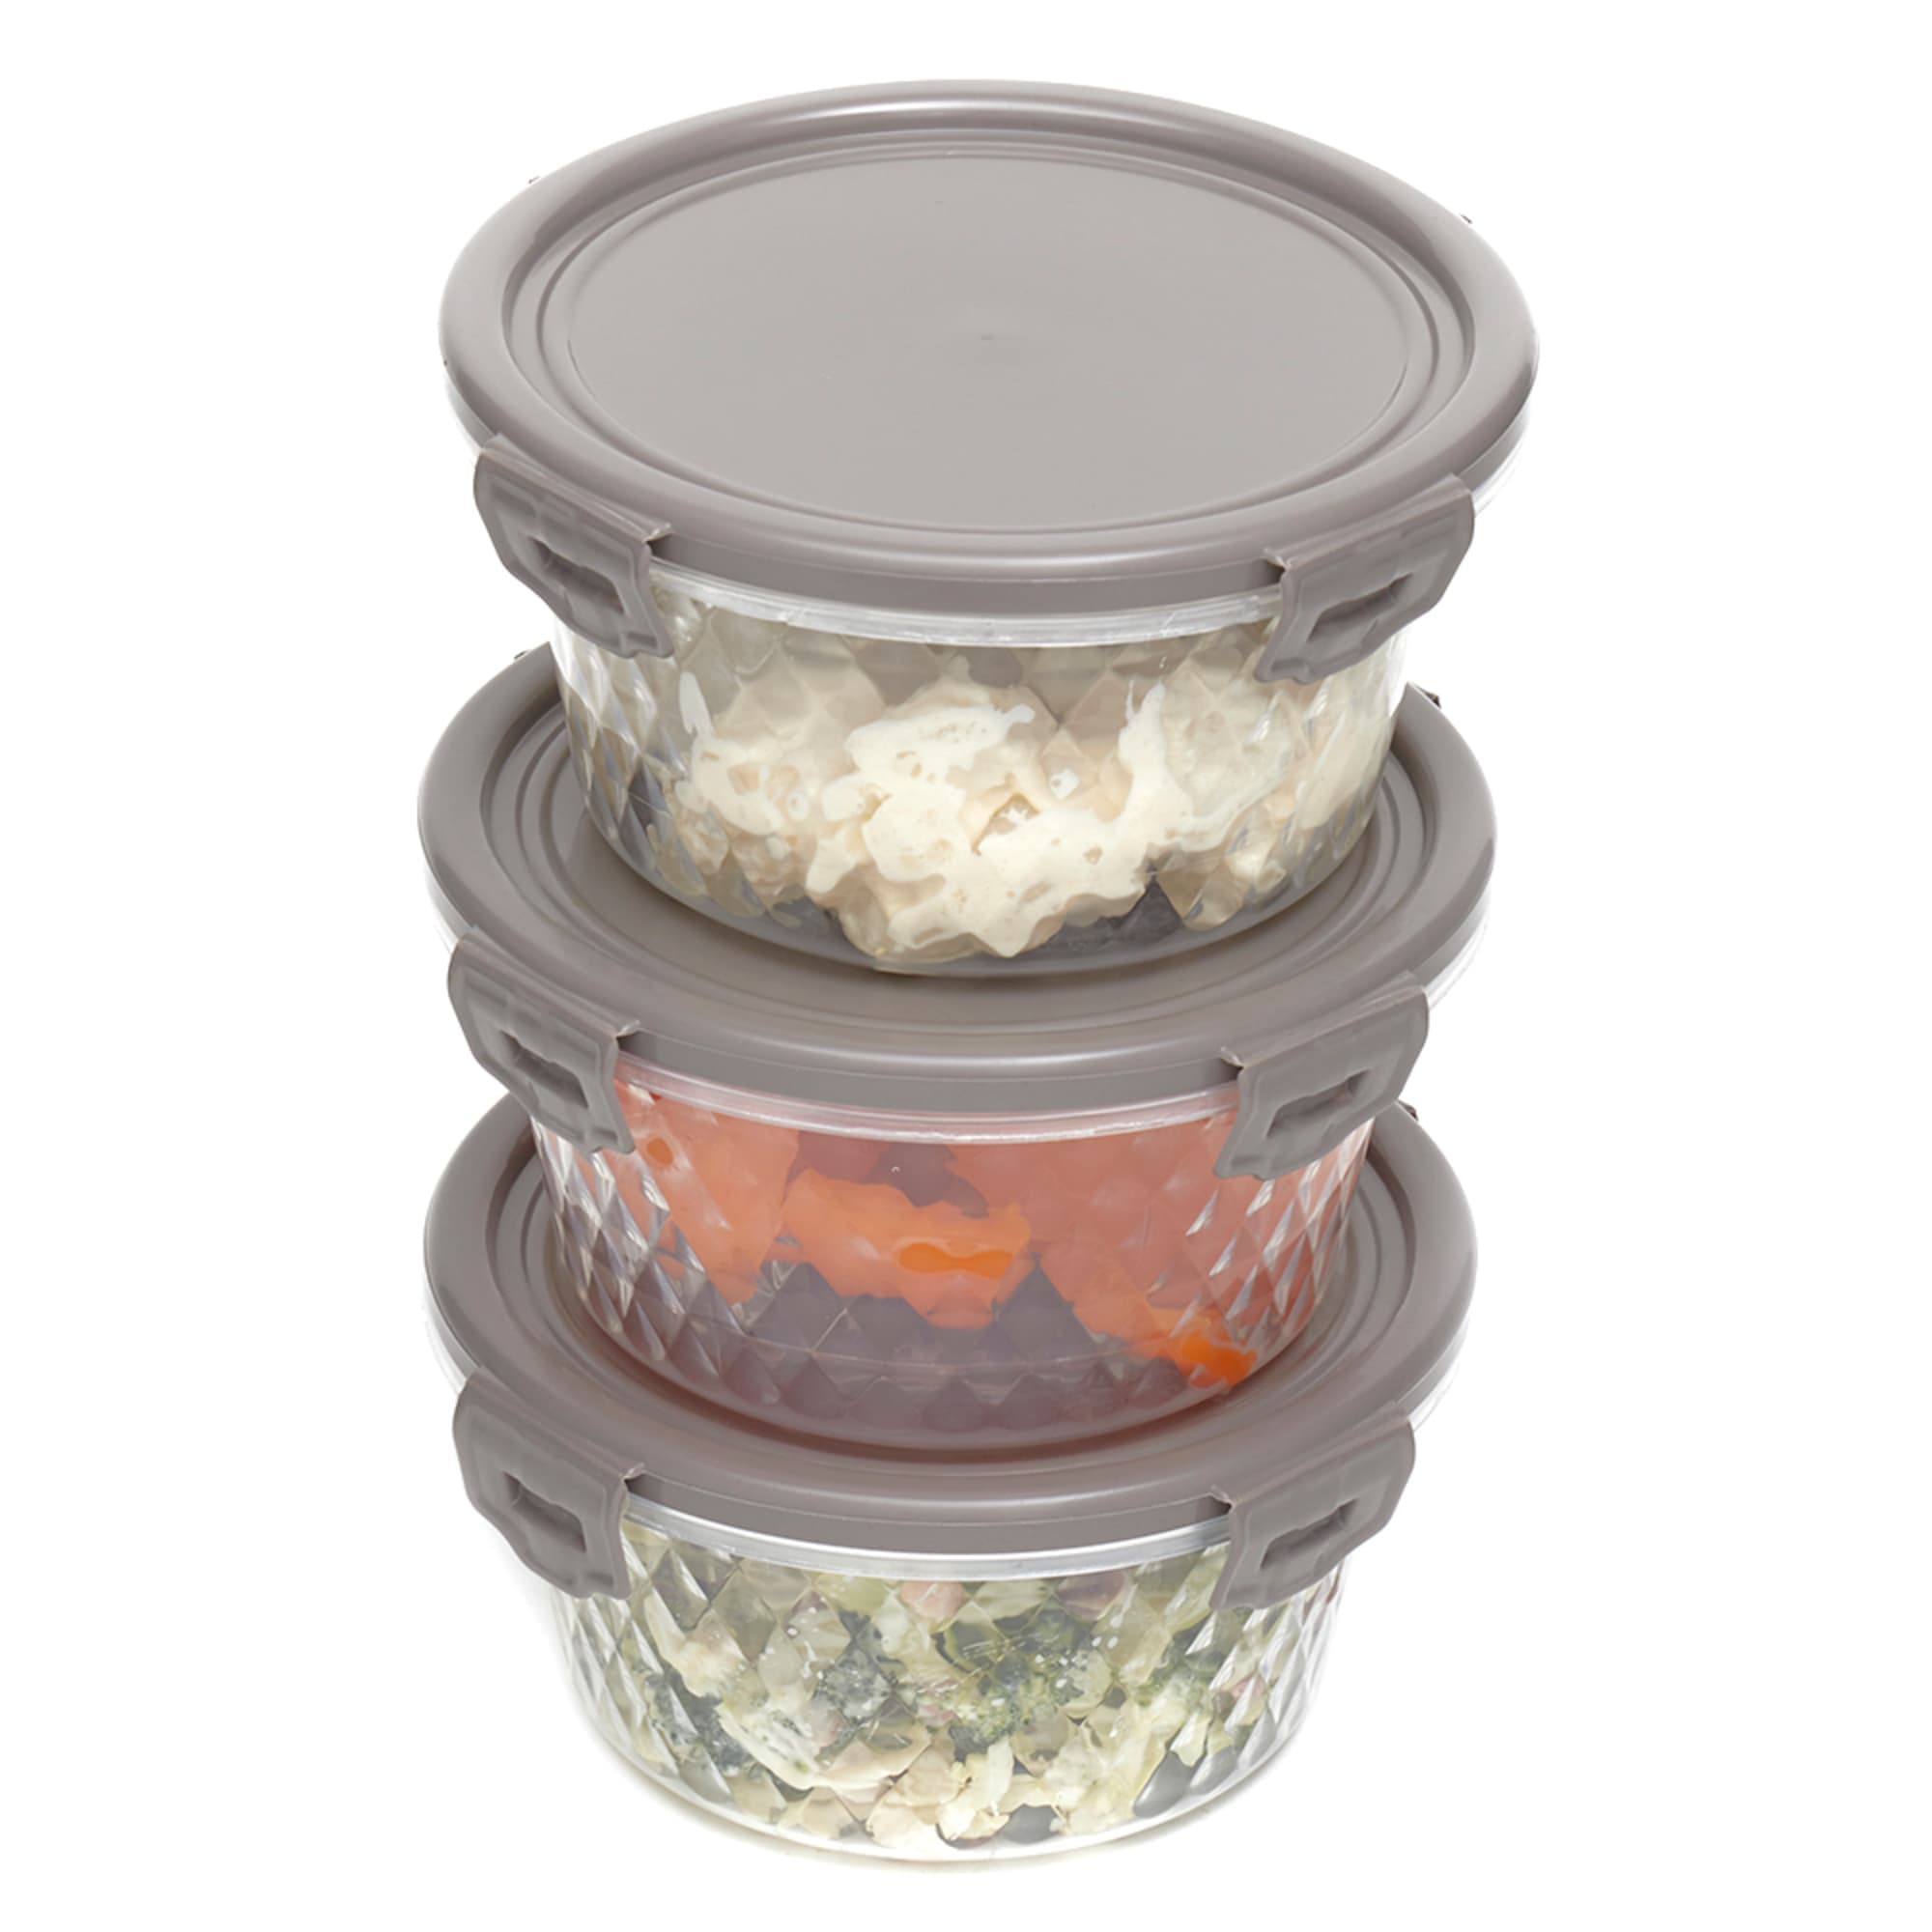 Home Basics Crystal 3 Piece Round Food Storage Containers with Locking Lids, (18 oz) $3 EACH, CASE PACK OF 6